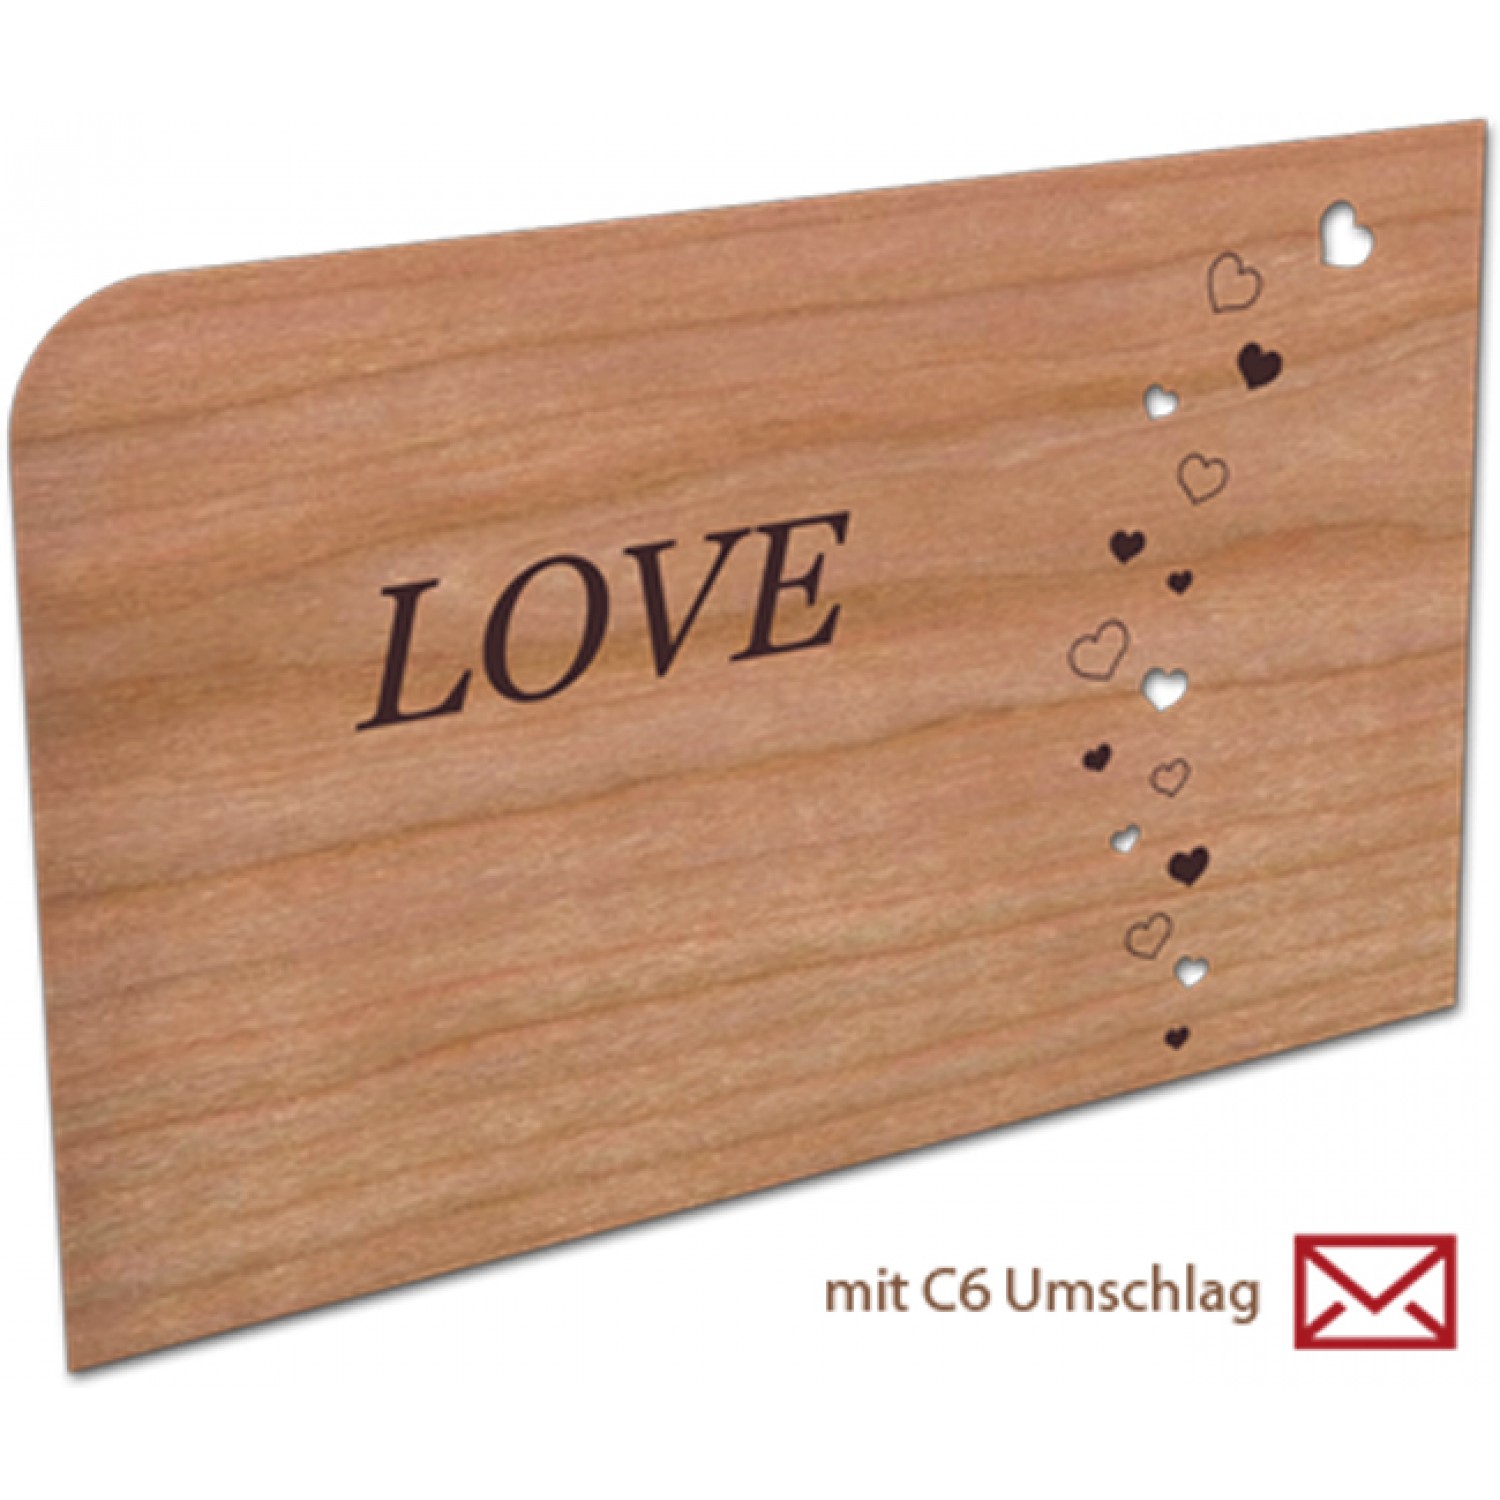 LOVE wooden greeting card & postcard | holzpost